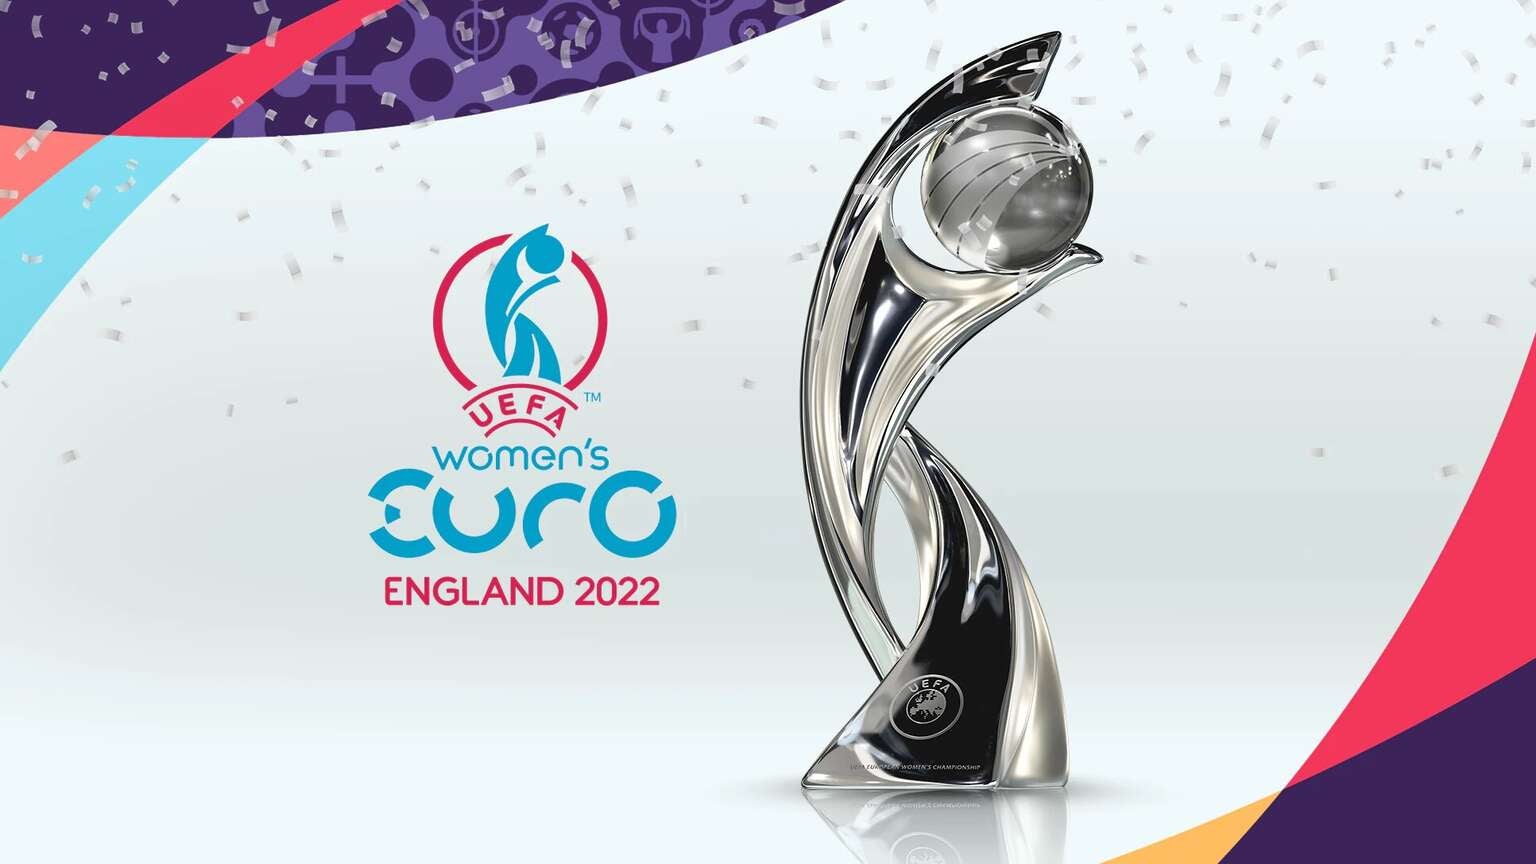 How To Watch The Uefa Women S Euro Final England Vs Germany For Free Without Cable The